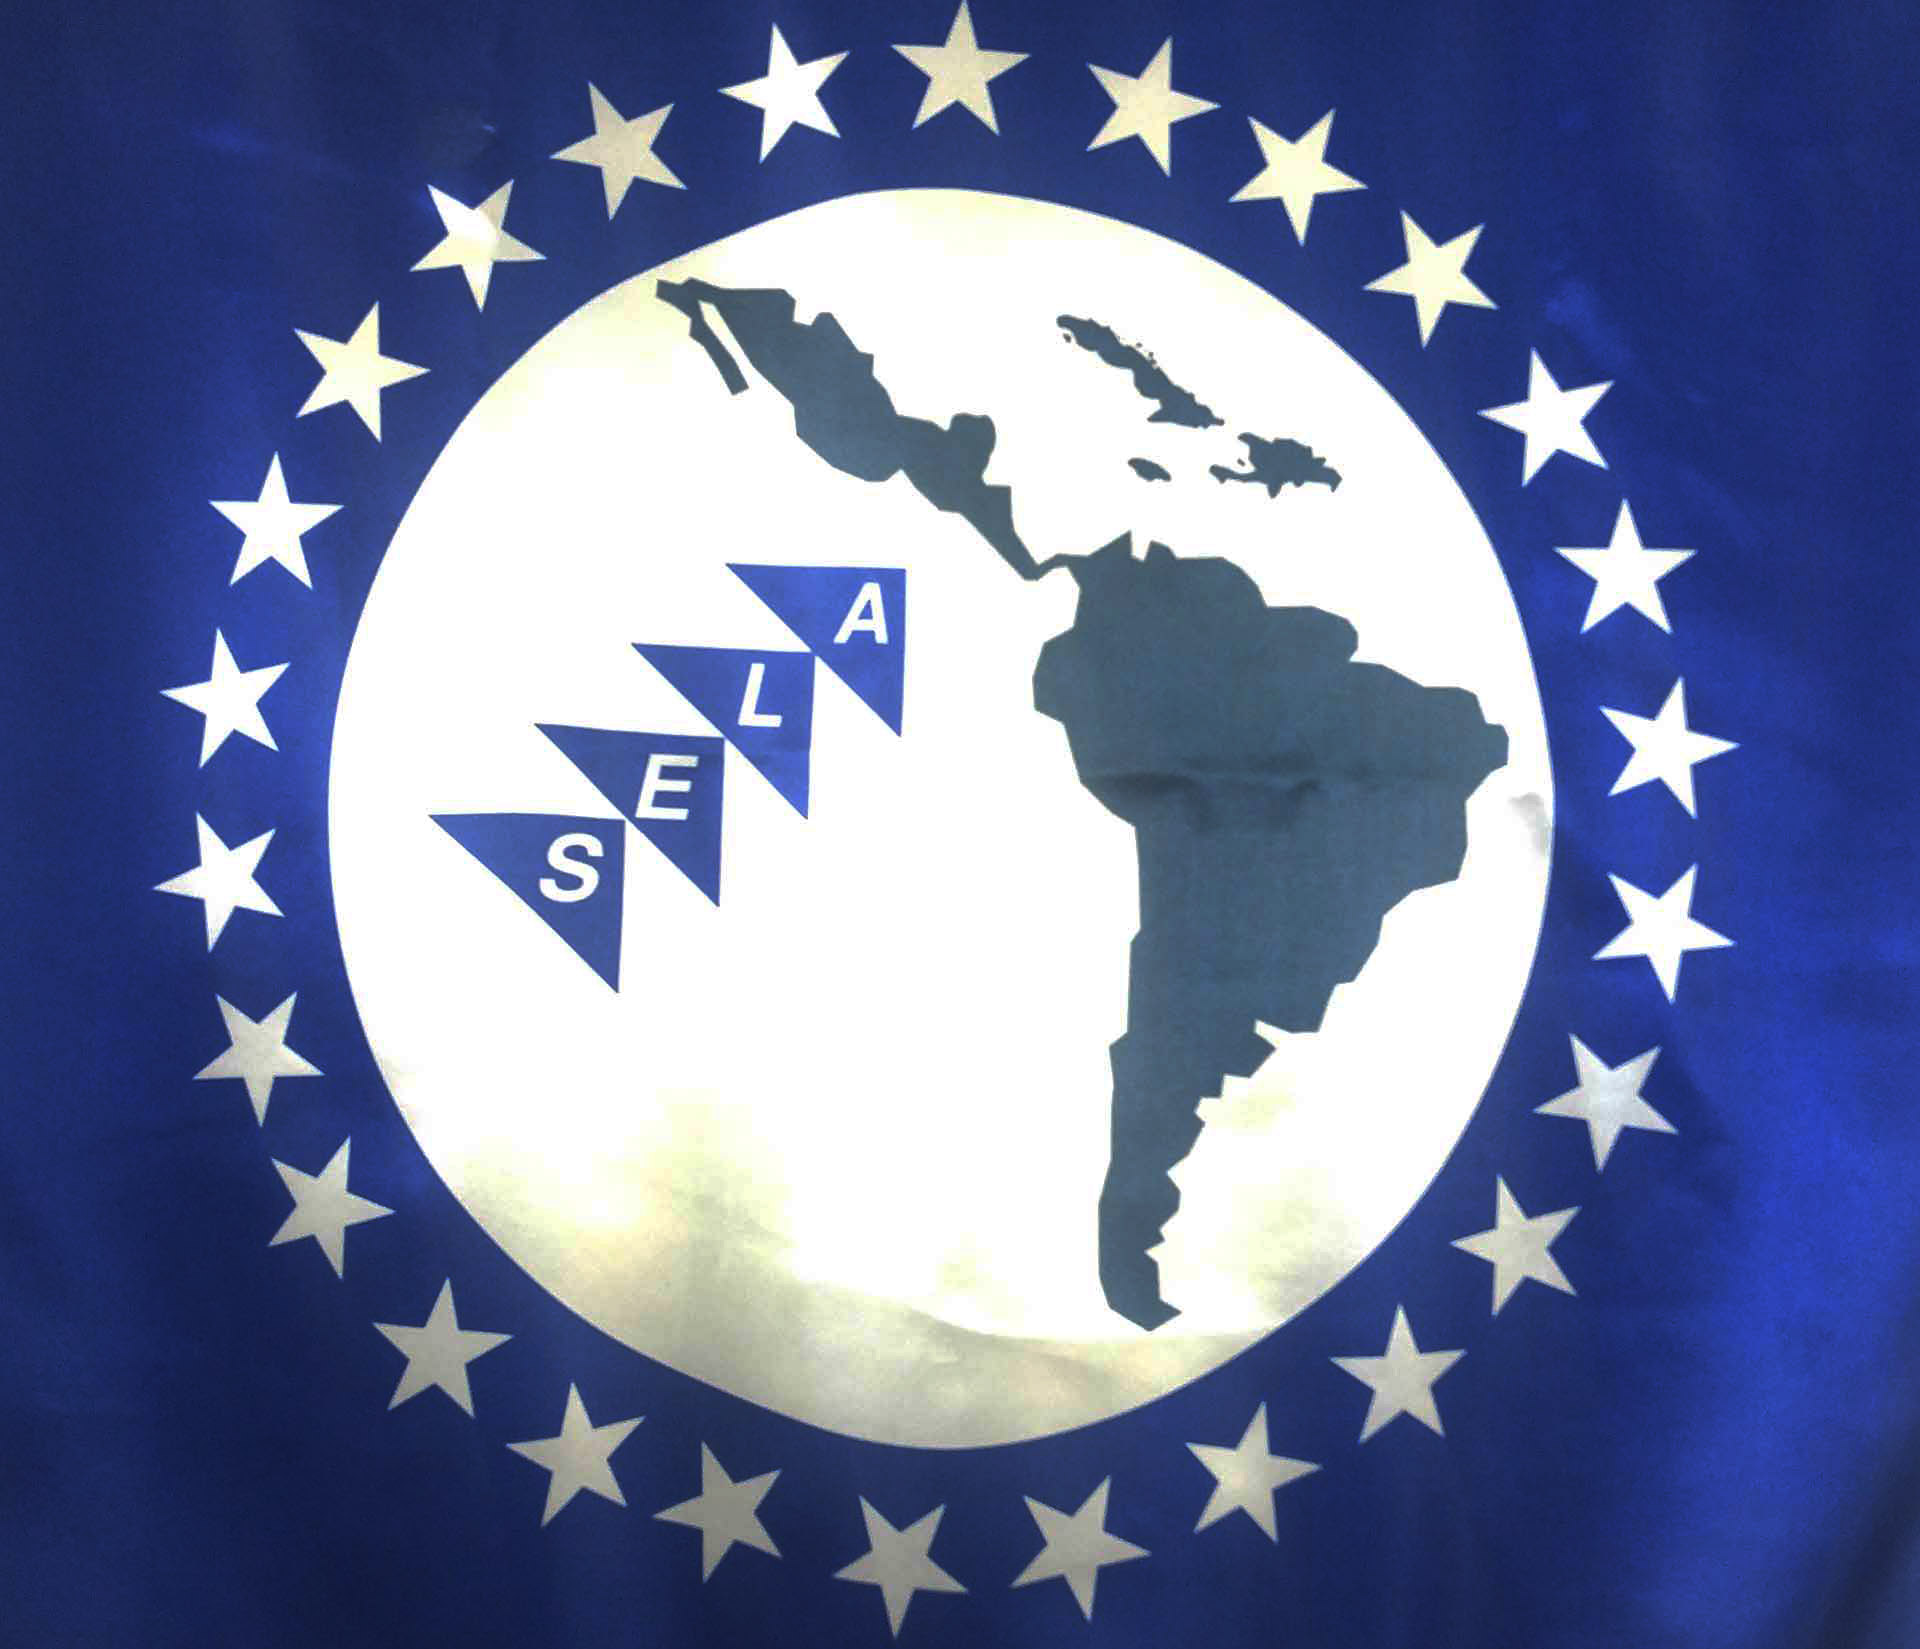 SELA: 46 years doing history for Latin American and Caribbean integration